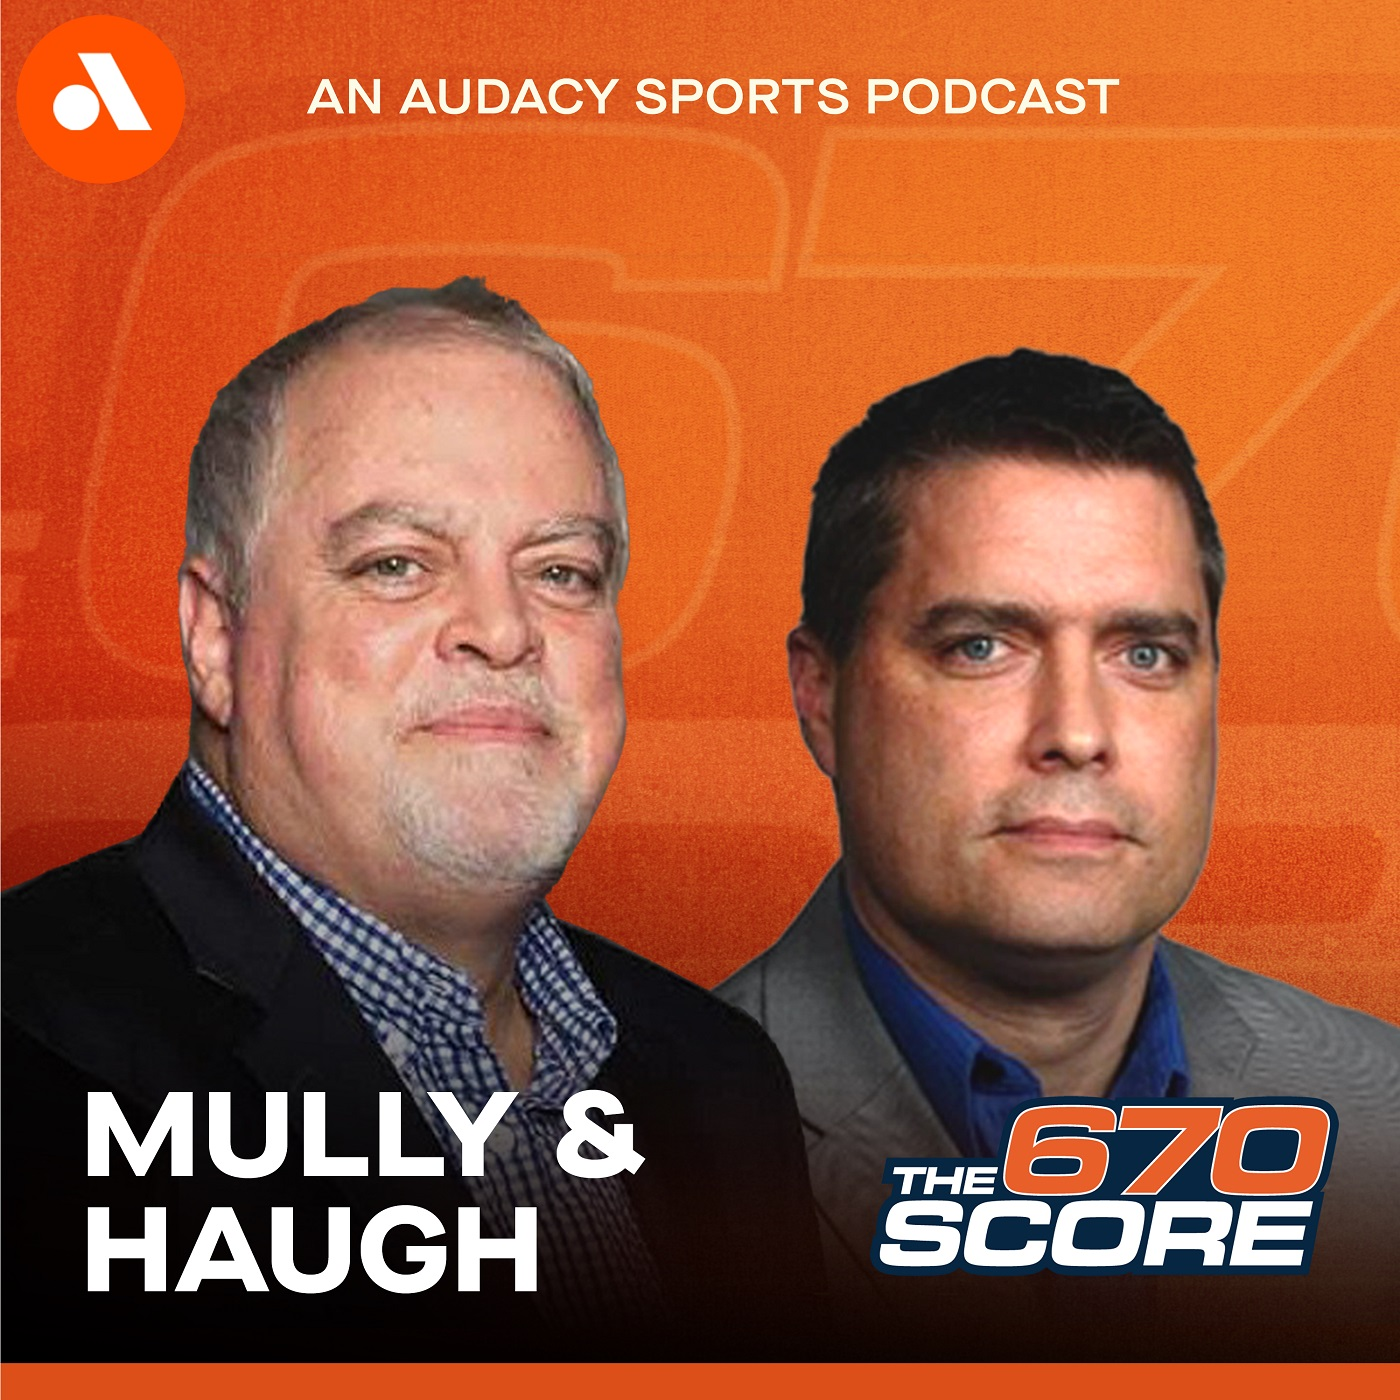 Mully & Haugh: Fans allowed back in ballparks in Chicago, Jerry Palm interview (Hour 3)